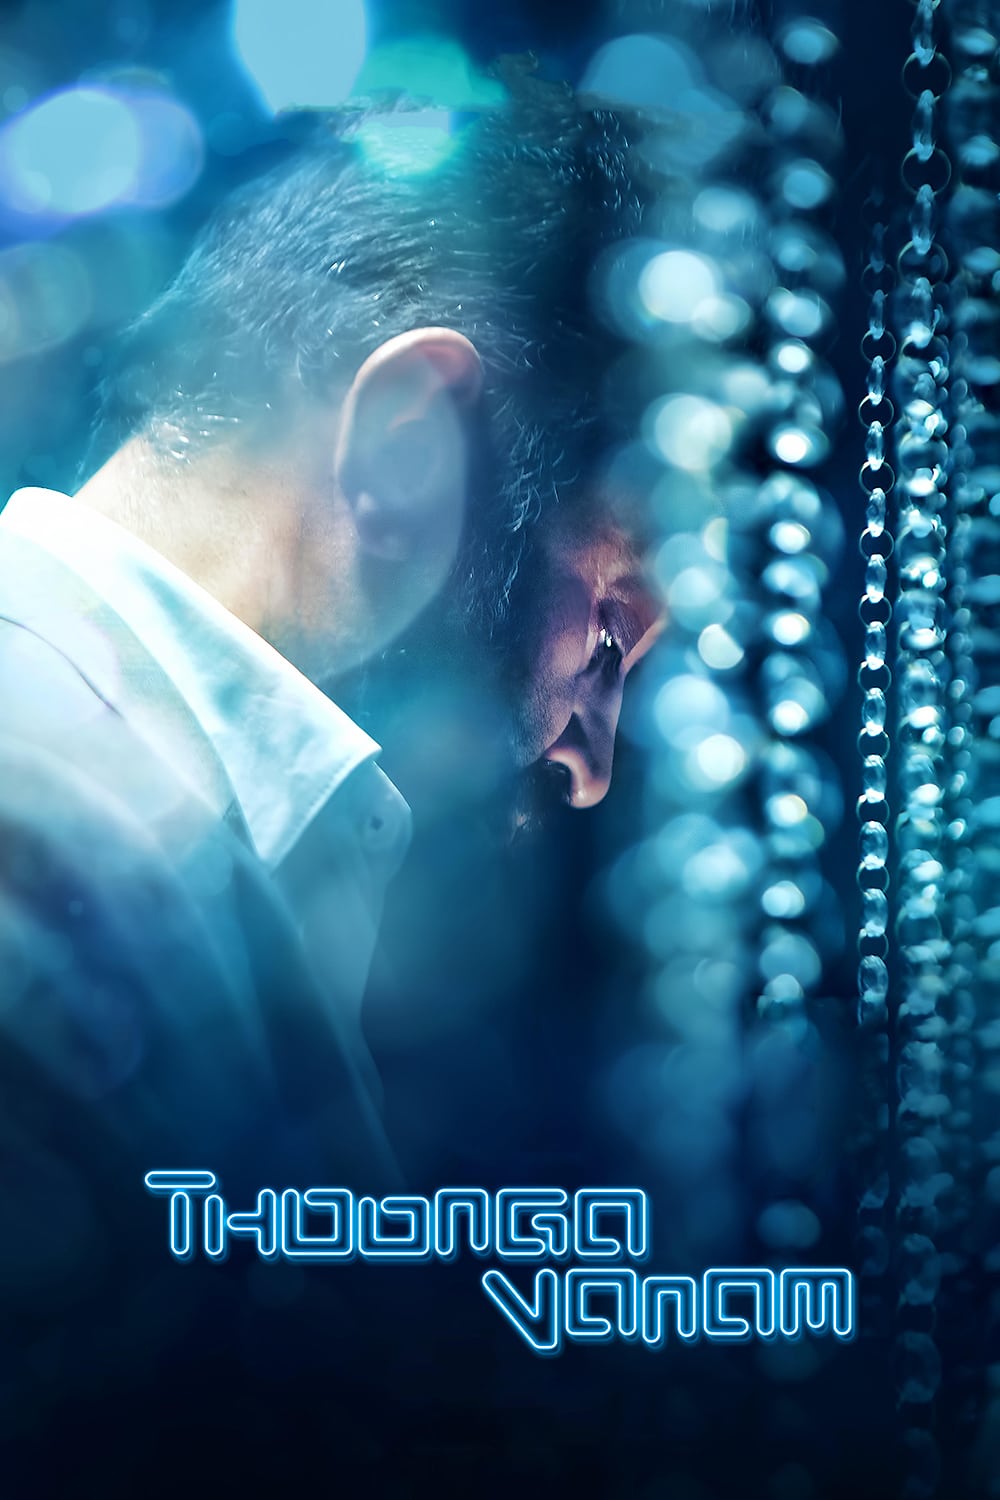 Poster for the movie "Thoongaavanam"